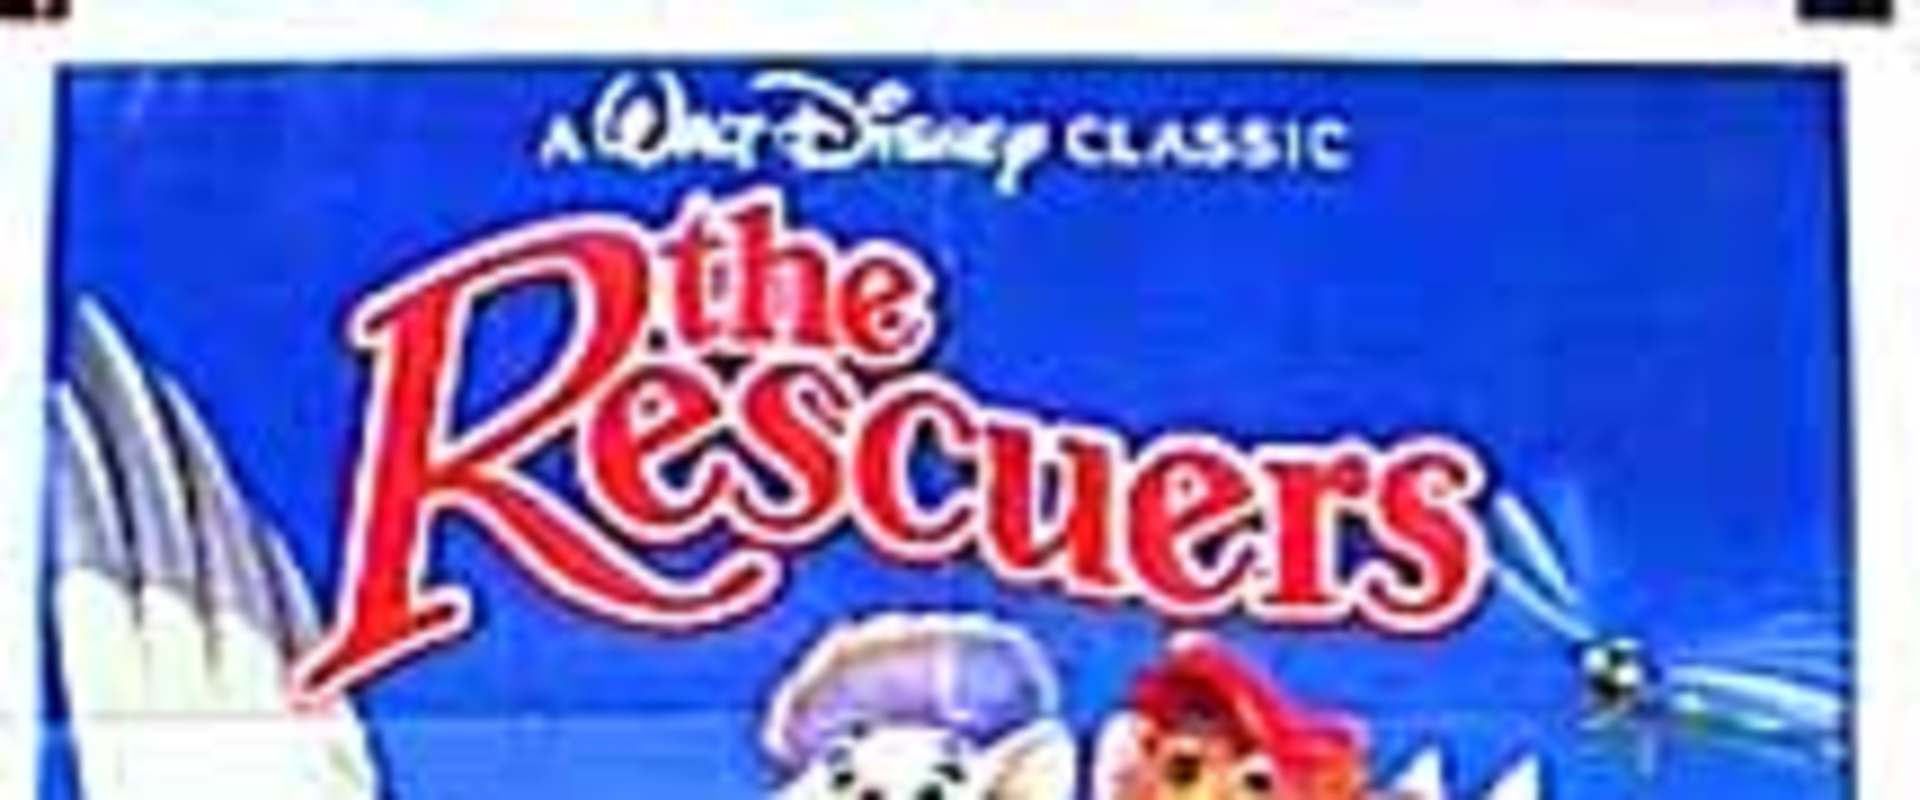 The Rescuers background 2